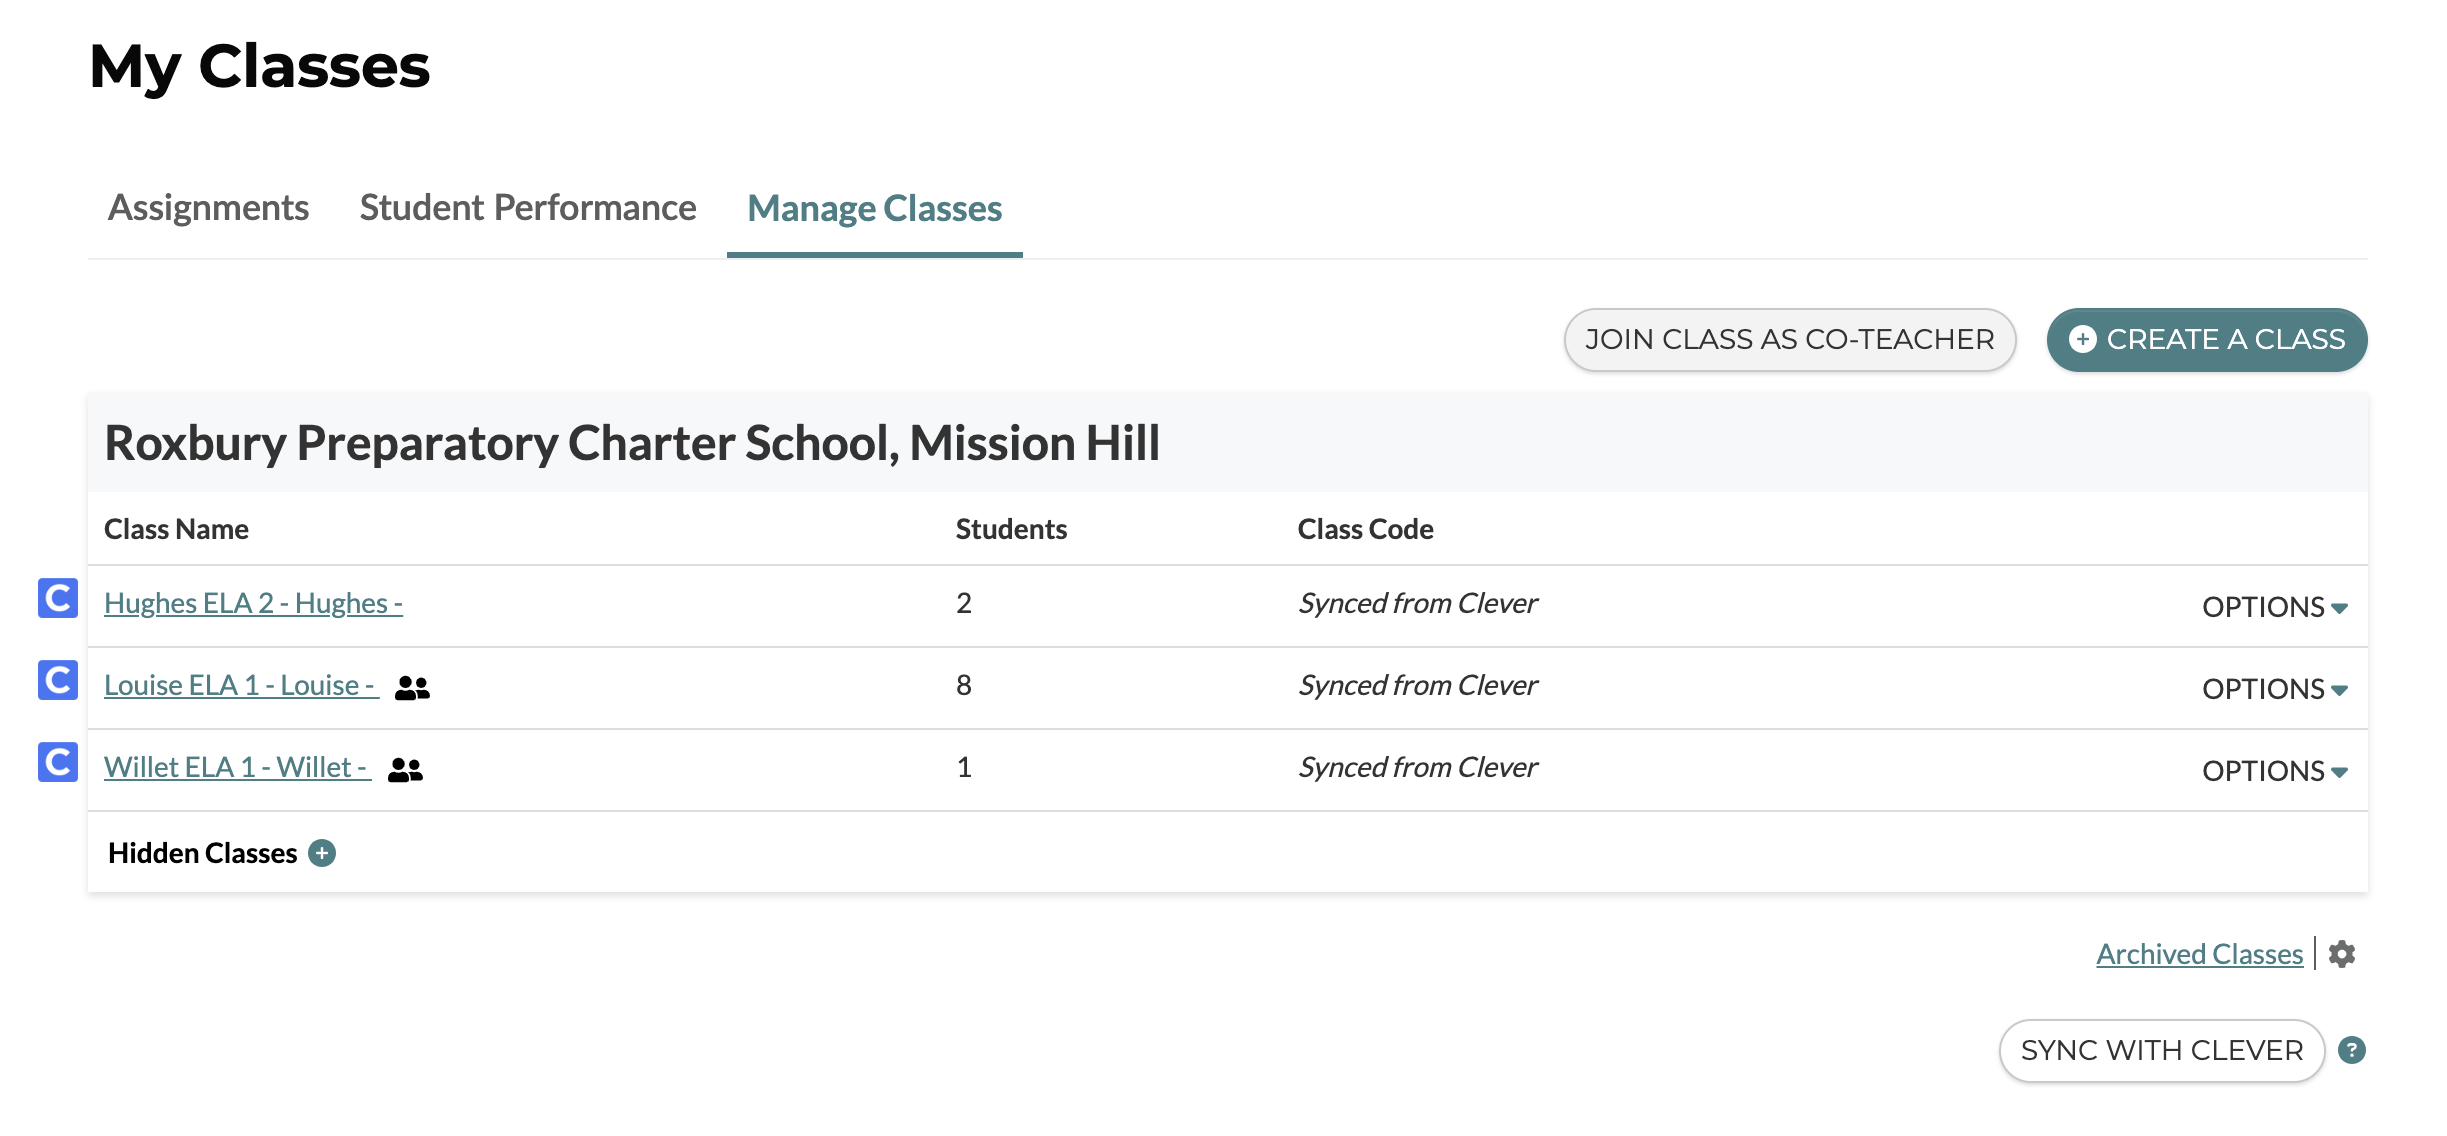 A screenshot showing the Manage Classes page on CommonLit, with the option to sync with Clever.